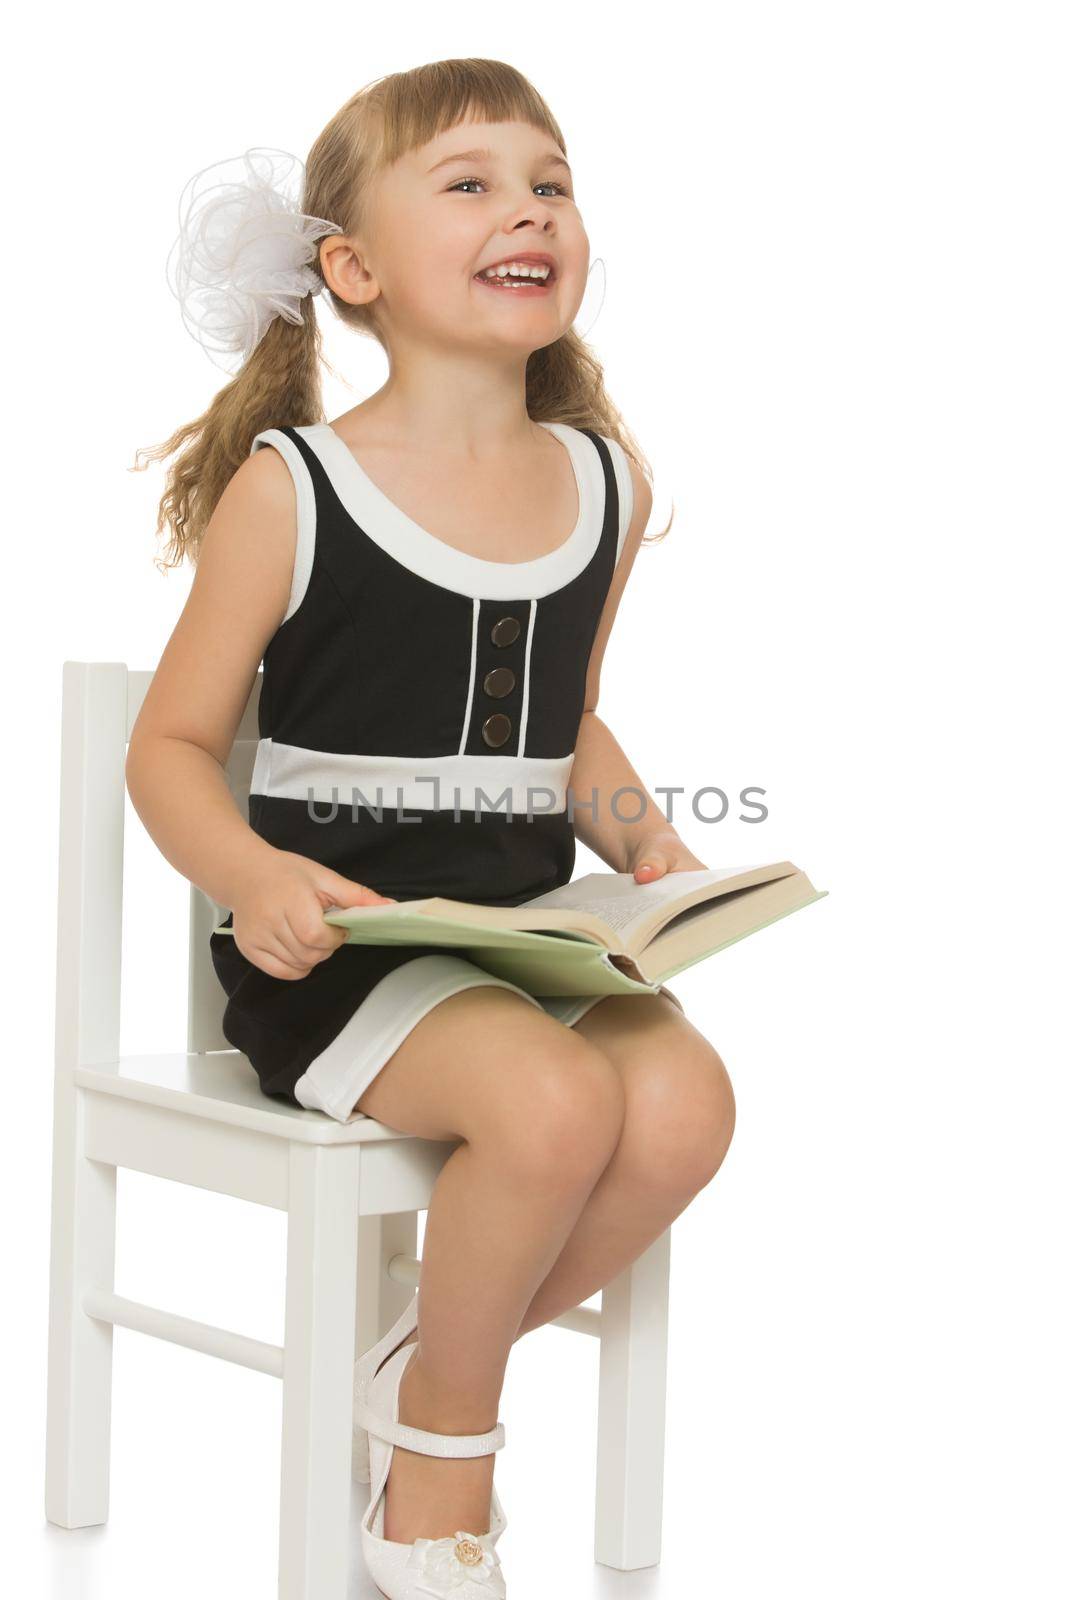 Honey girl school girl in a black dress with a book in his hands. With a white bow on her head. Sitting on a chair - Isolated on white background